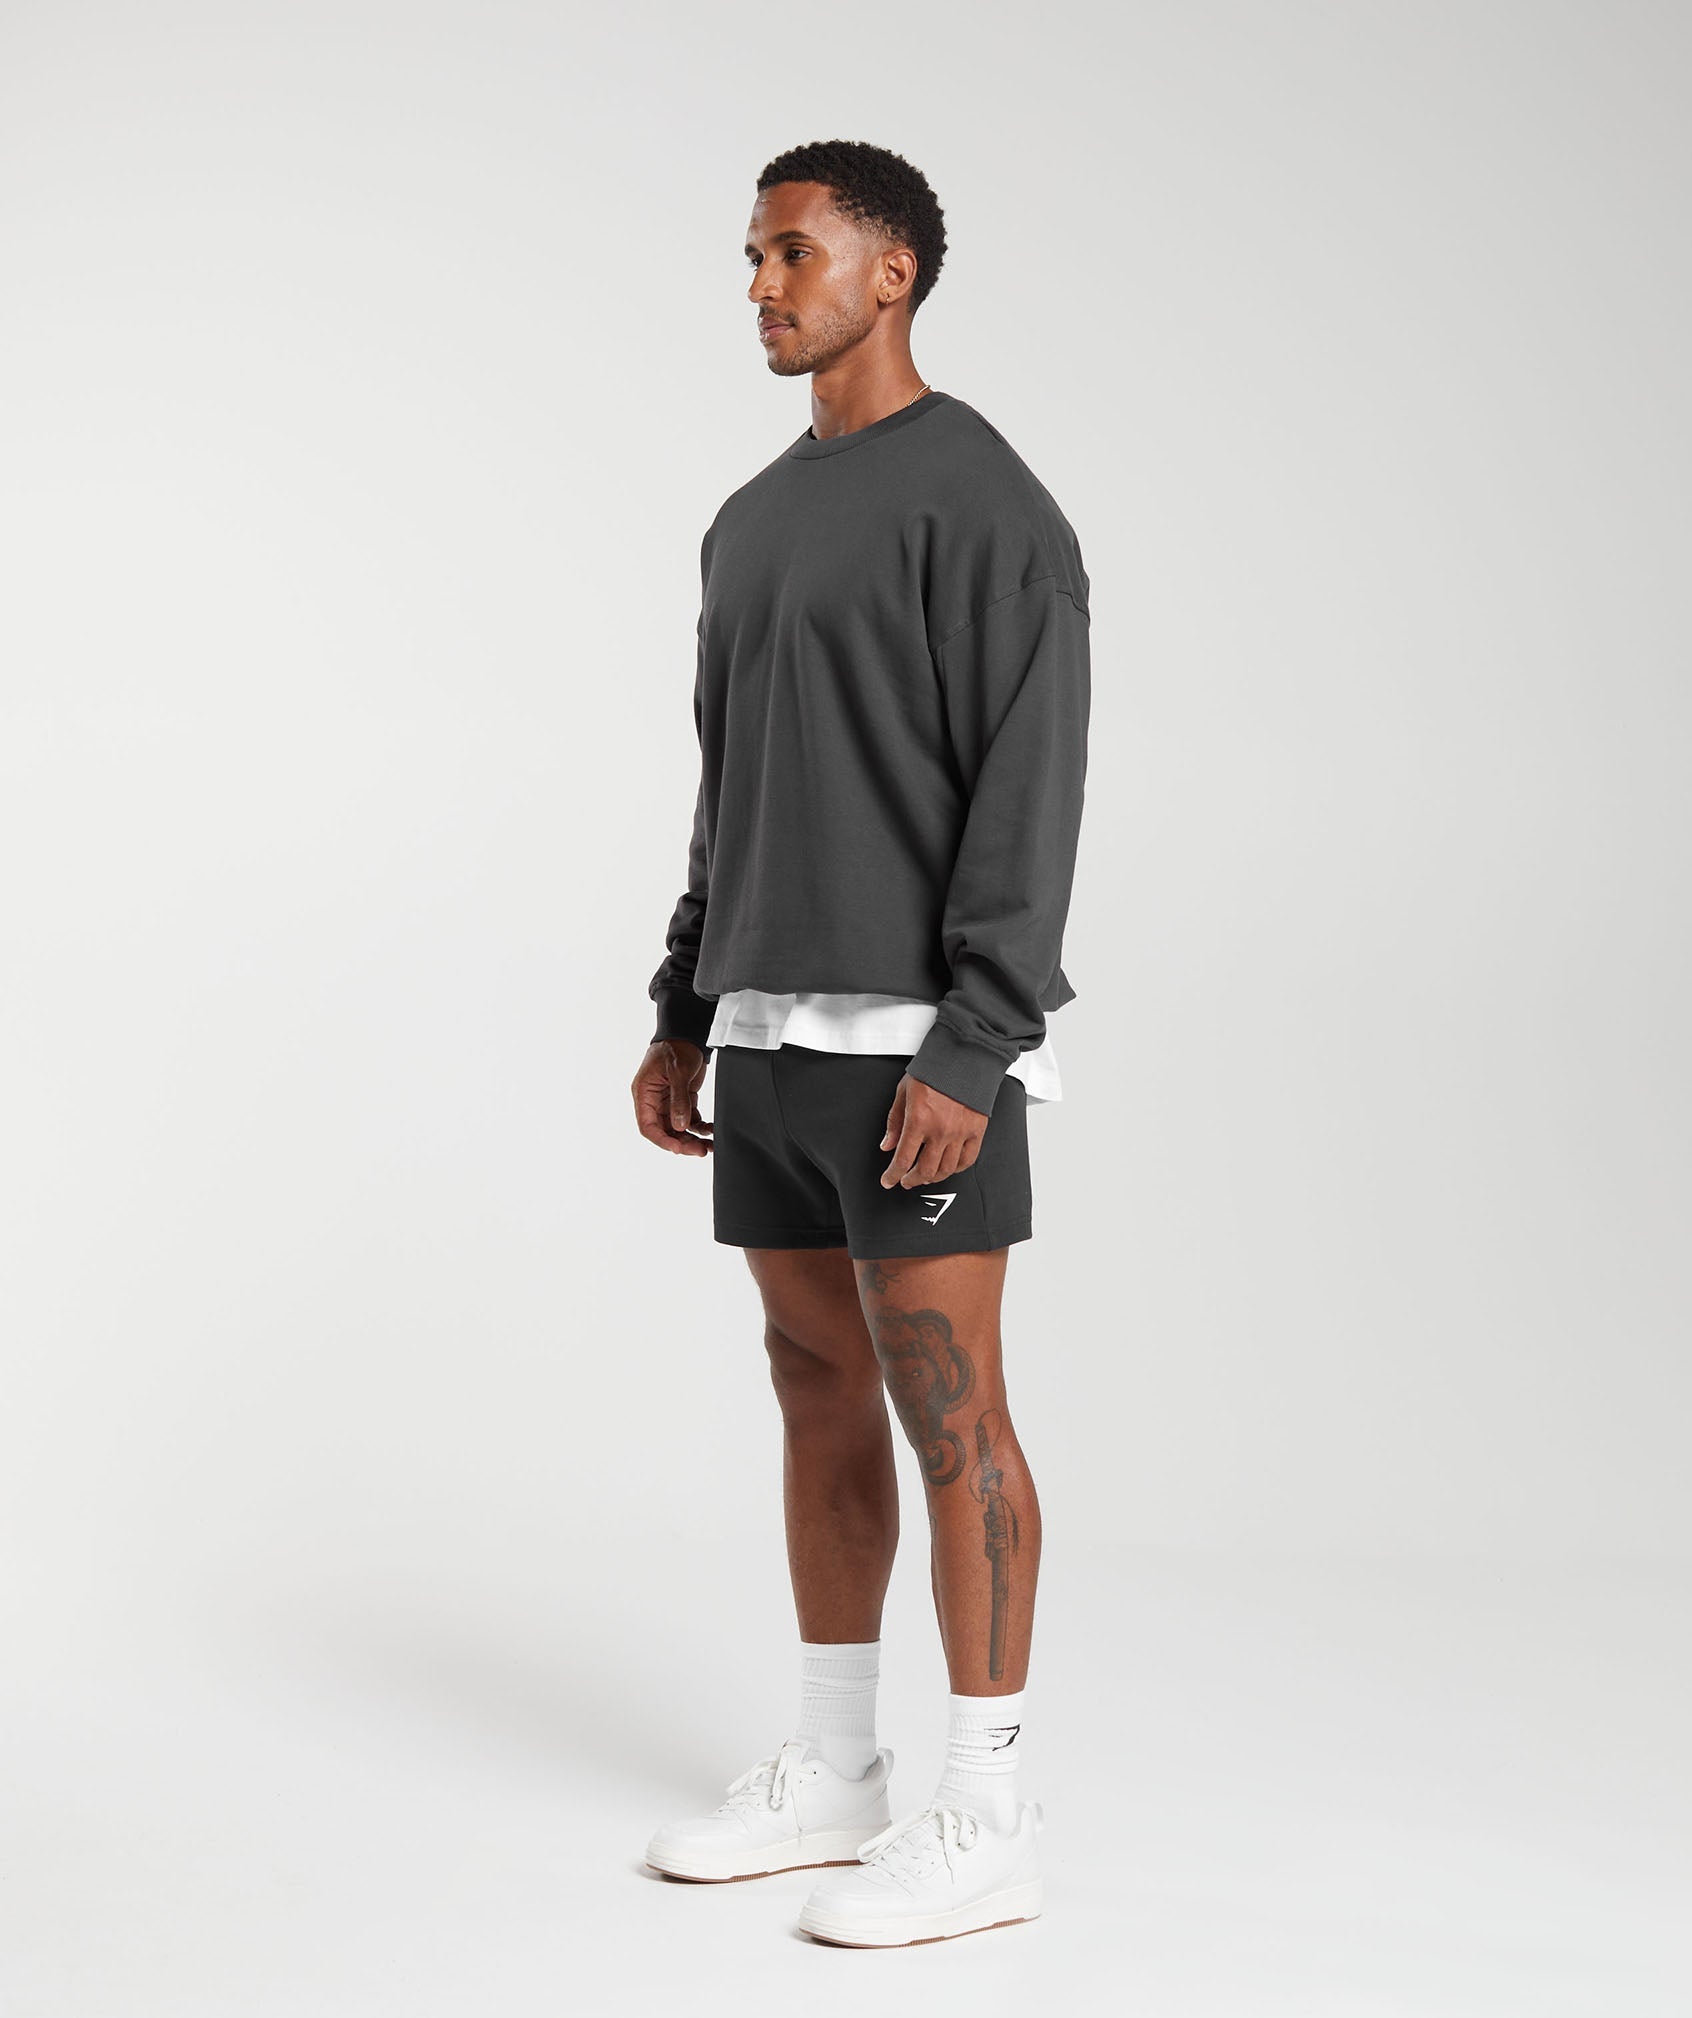 Rest Day Essential Crew in Onyx Grey - view 4